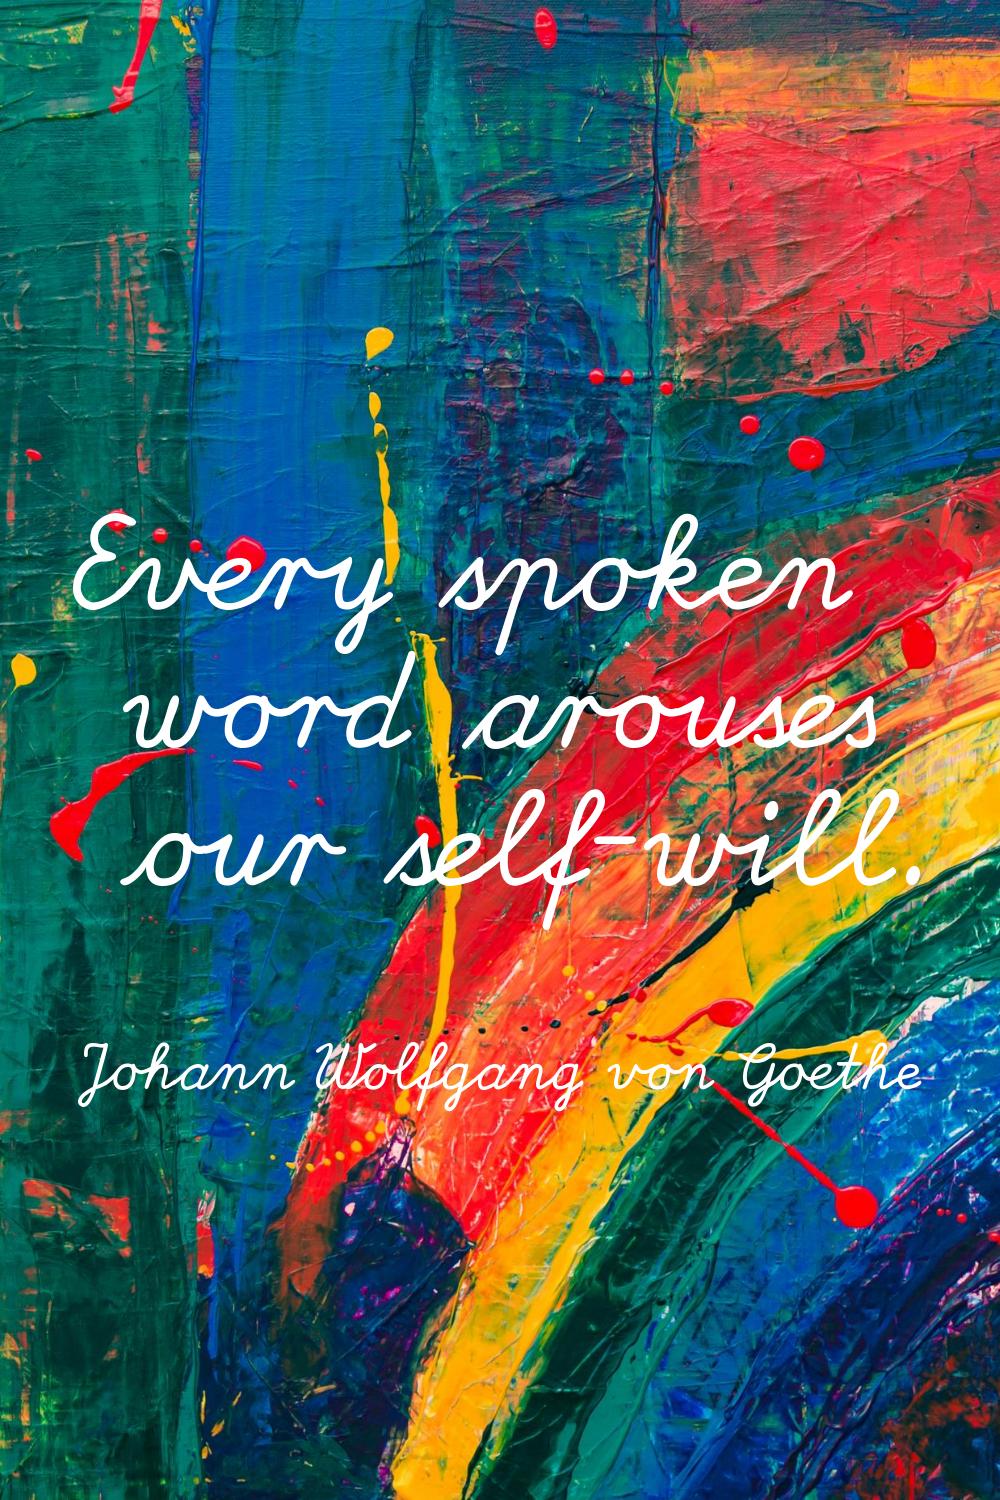 Every spoken word arouses our self-will.